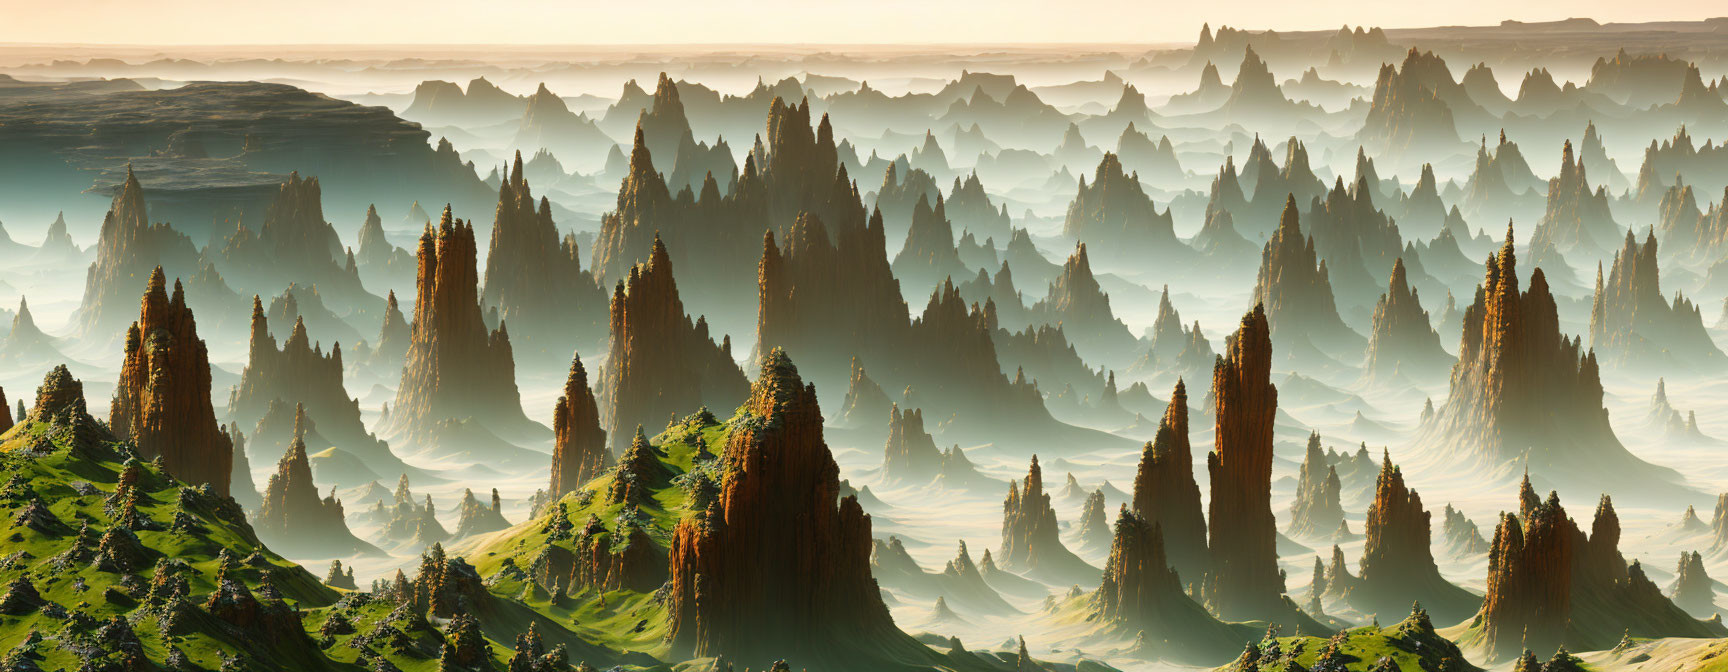 Majestic moss-covered rock formations in morning mist